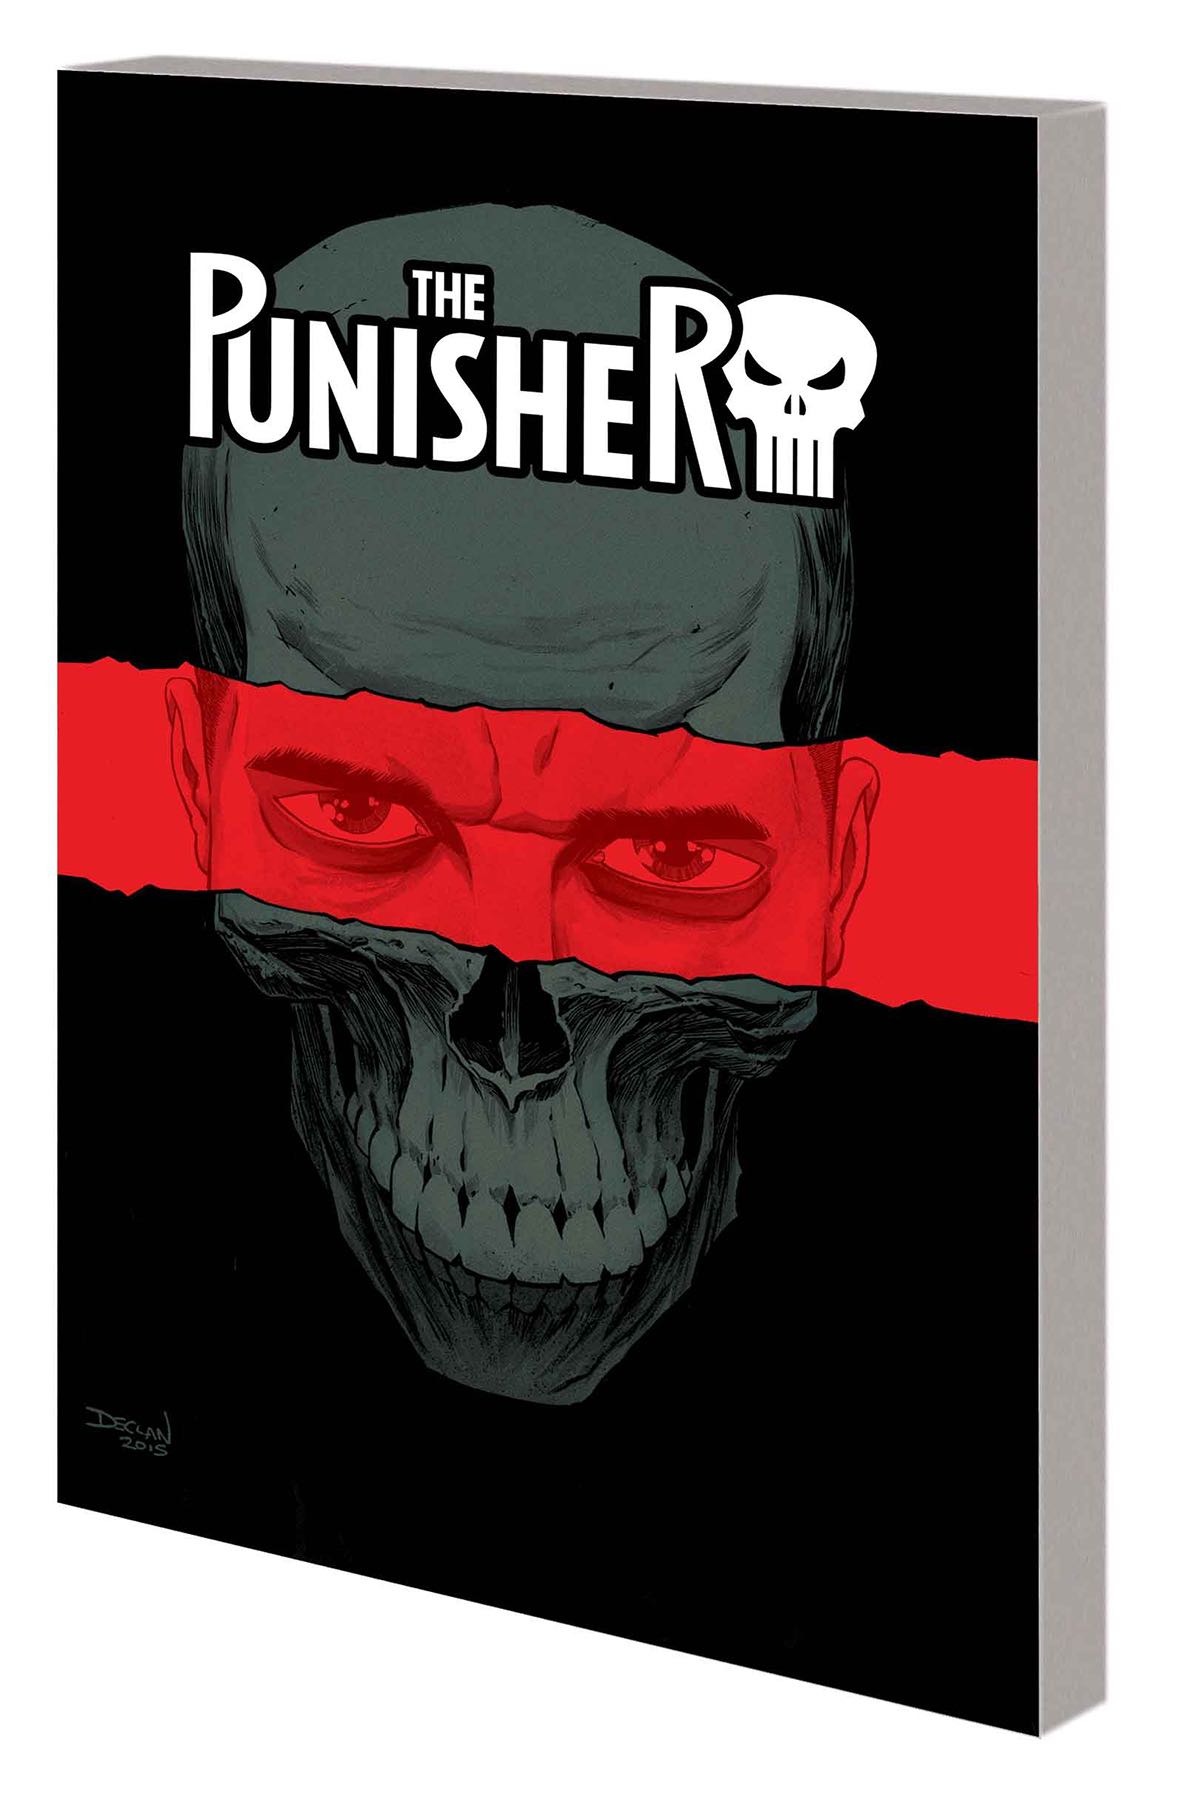 The Punisher Vol 1 On The Road Fresh Comics